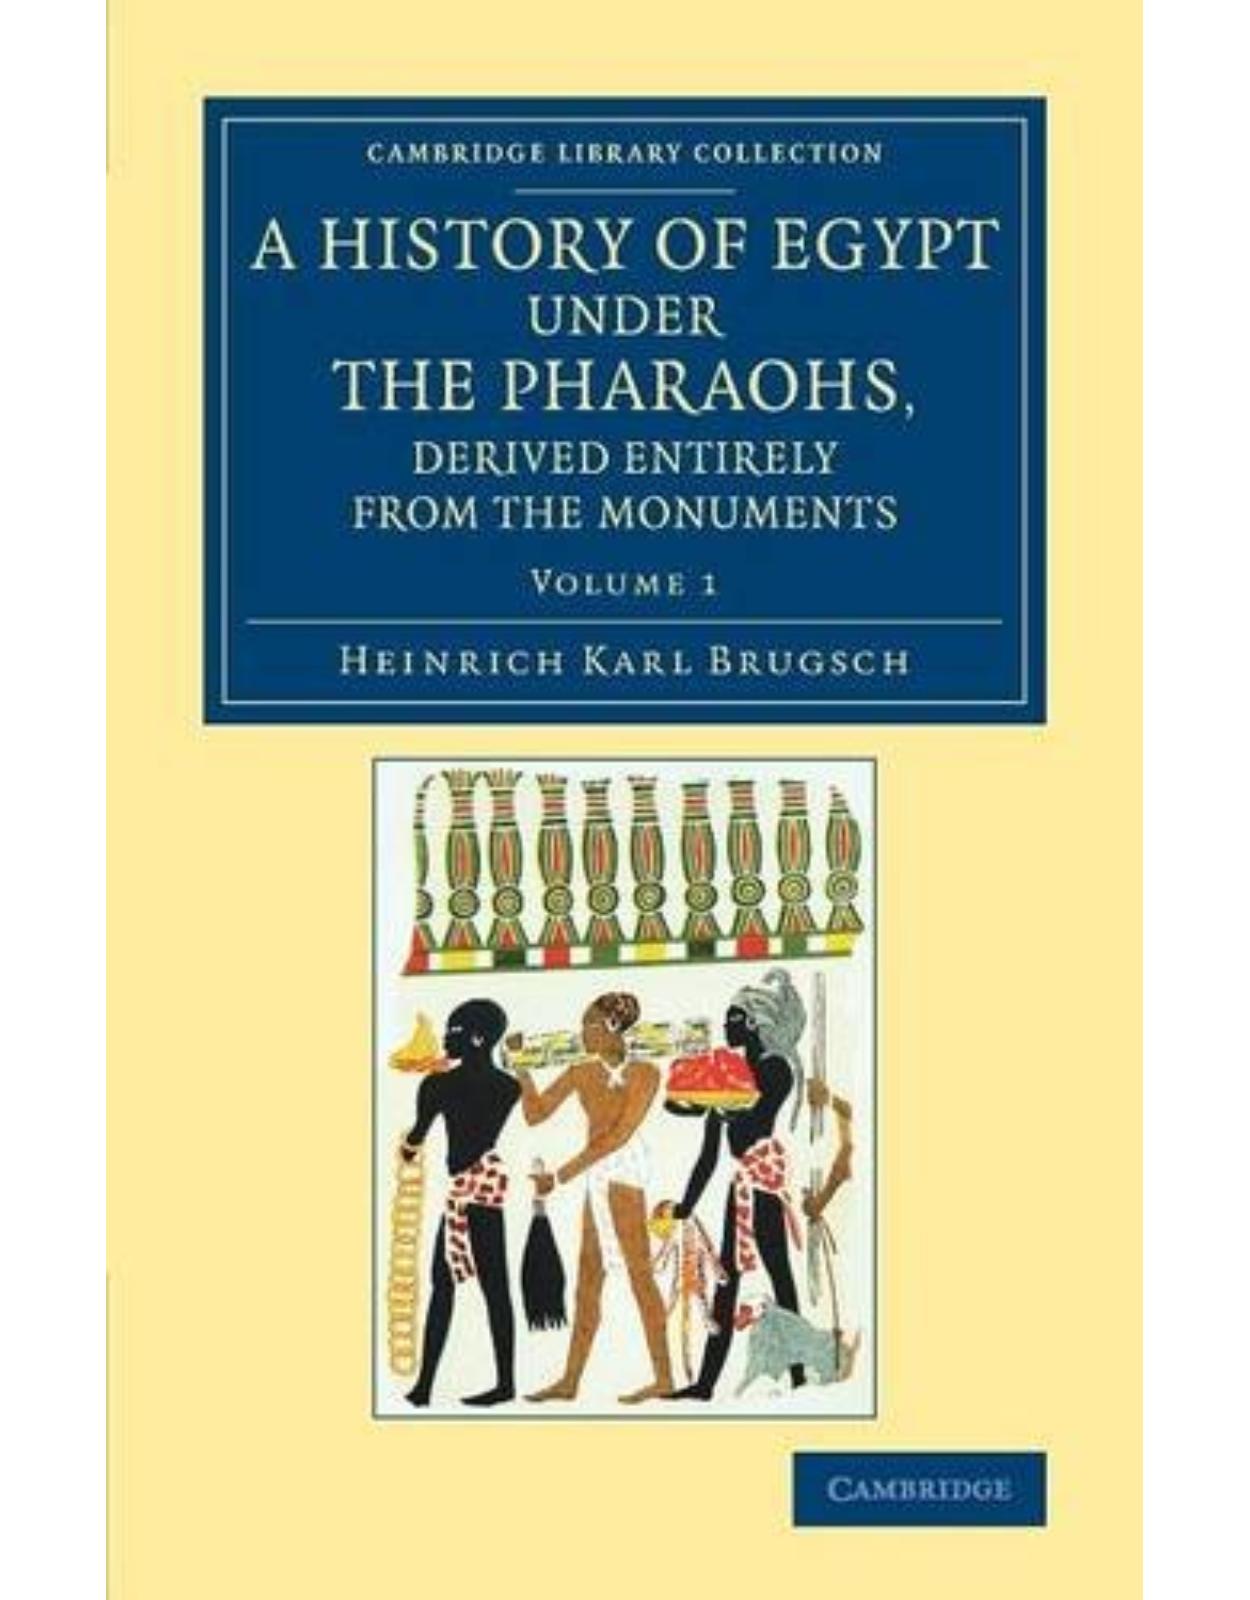 A History of Egypt under the Pharaohs, Derived Entirely from the Monuments: Volume 1: To Which Is Added a Memoir on the Exodus of the Israelites and ... (Cambridge Library Collection - Egyptology)